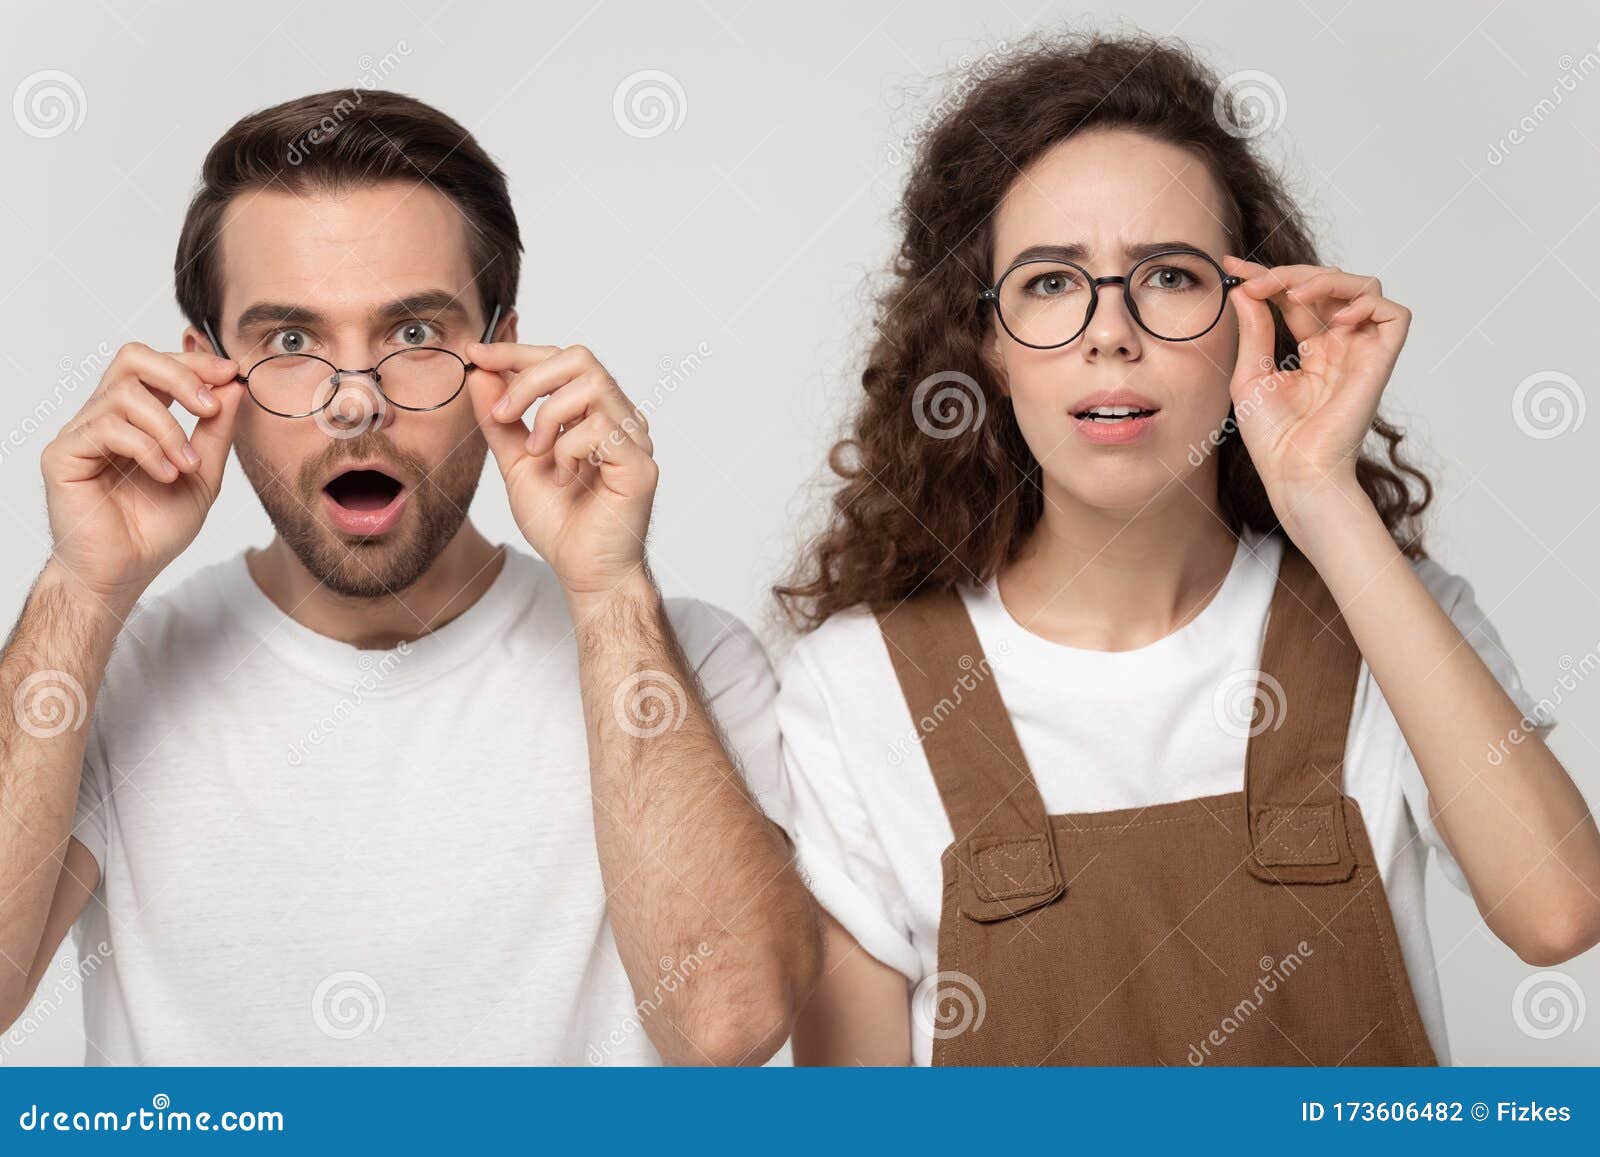 Surprised Happy Millennial Man And Woman Looking Closely At Camera